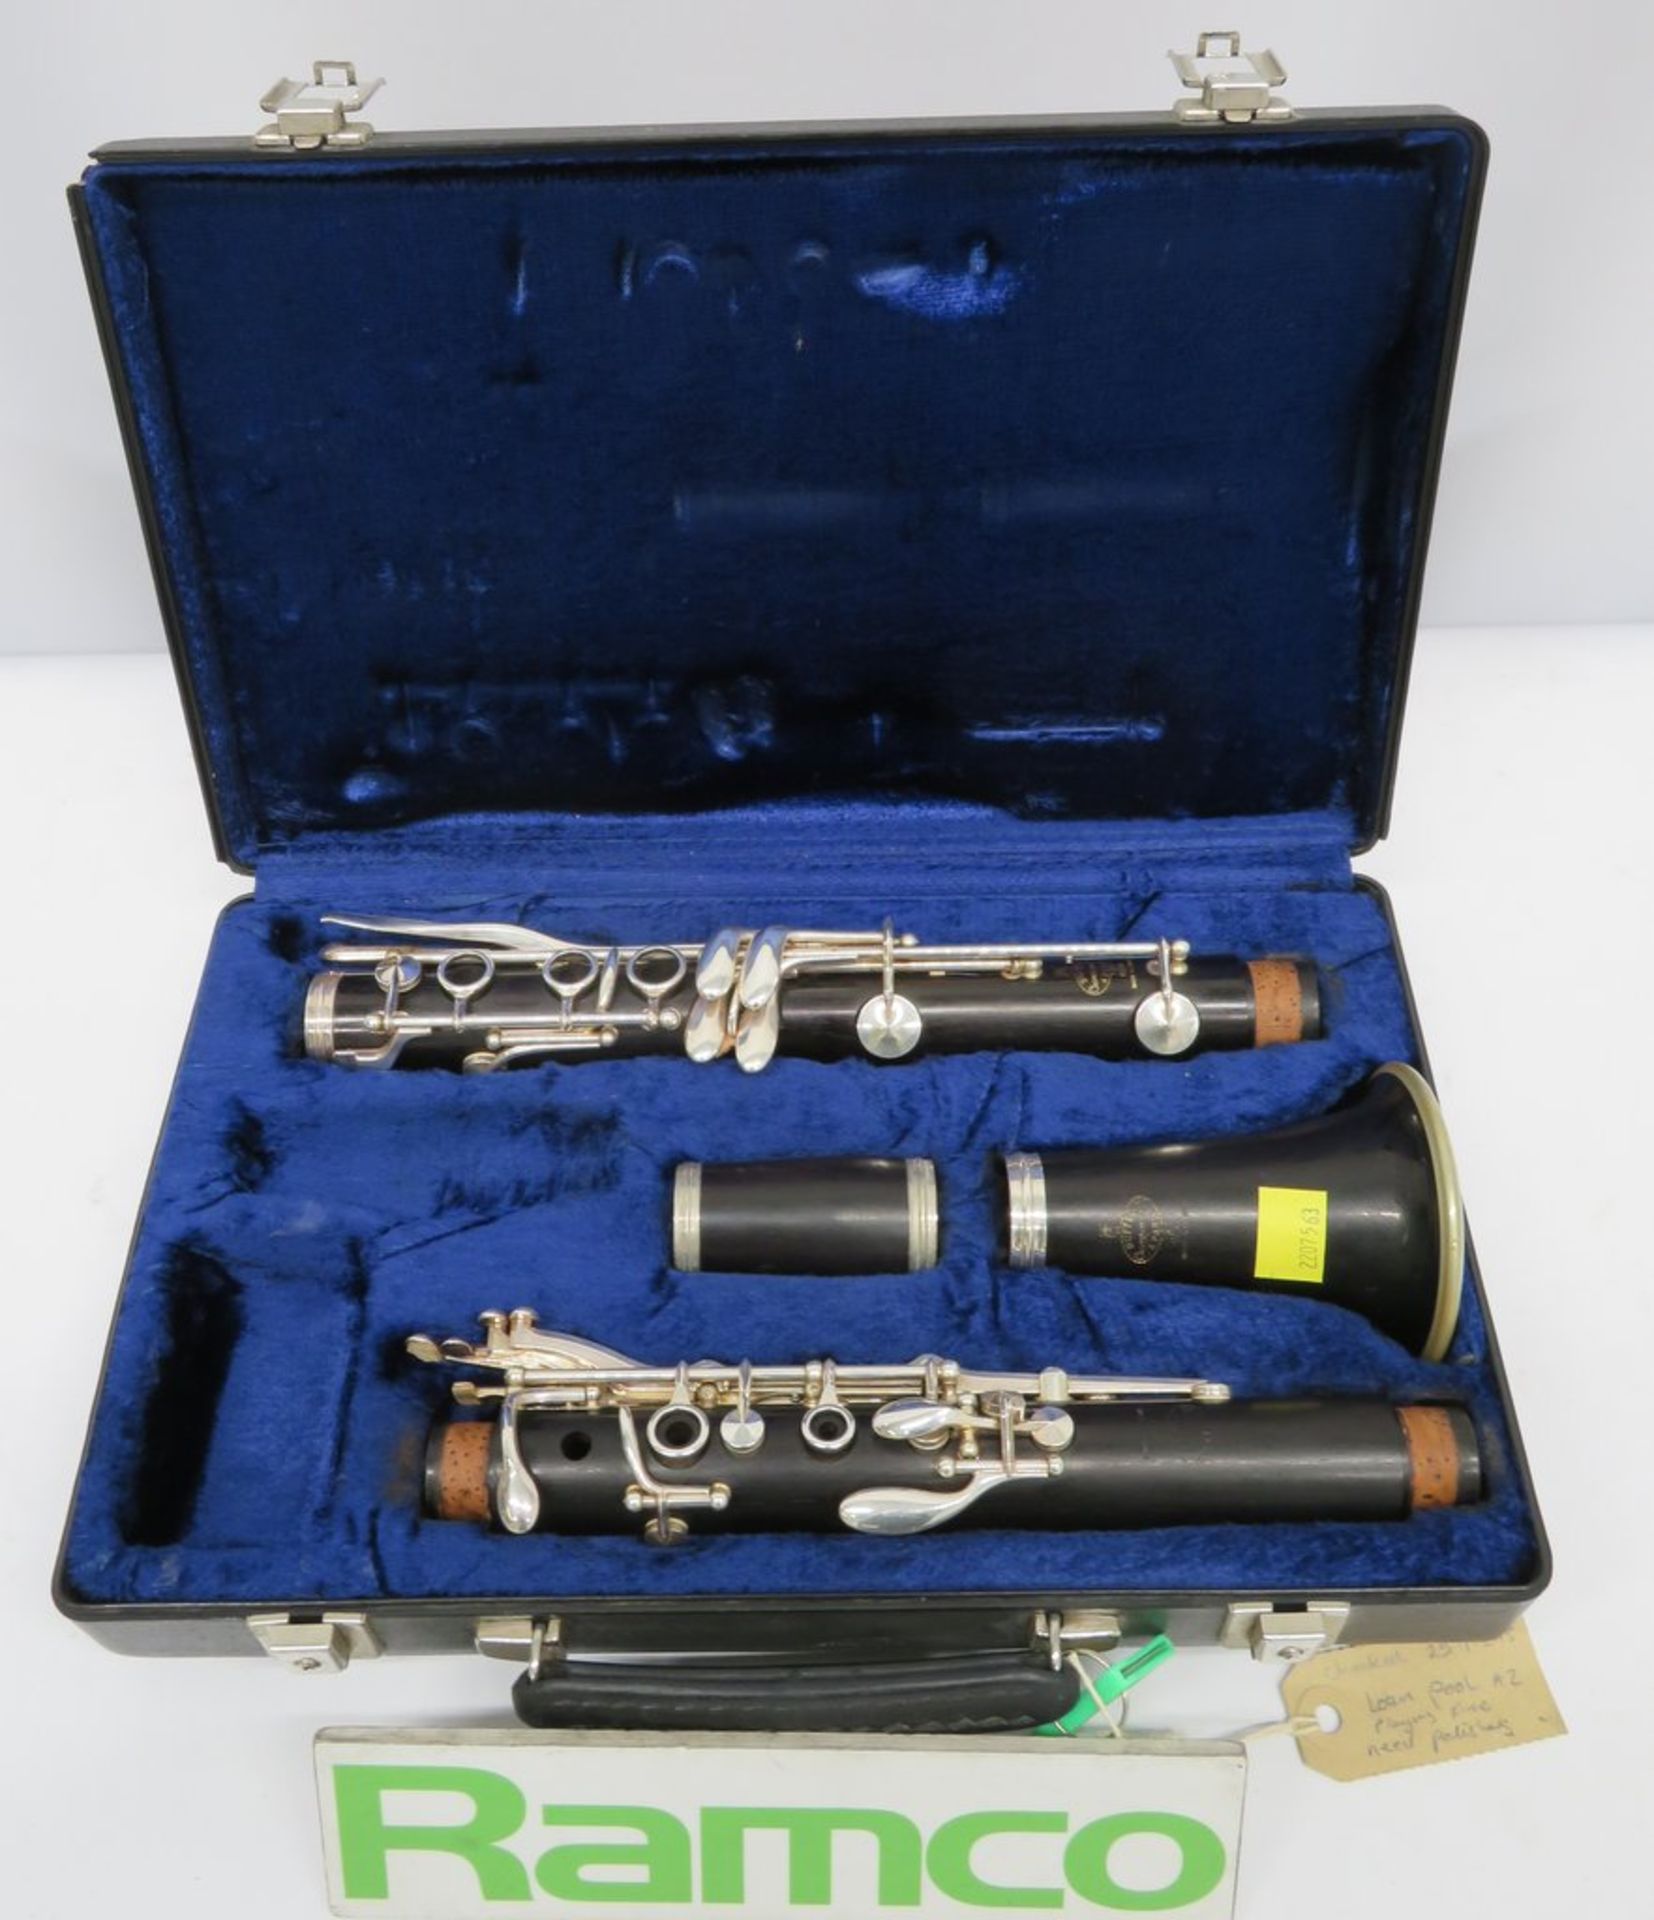 Buffet Crampon R13 Clarinet With Case. Serial Number: 386372. Full Length 63cm. Please No